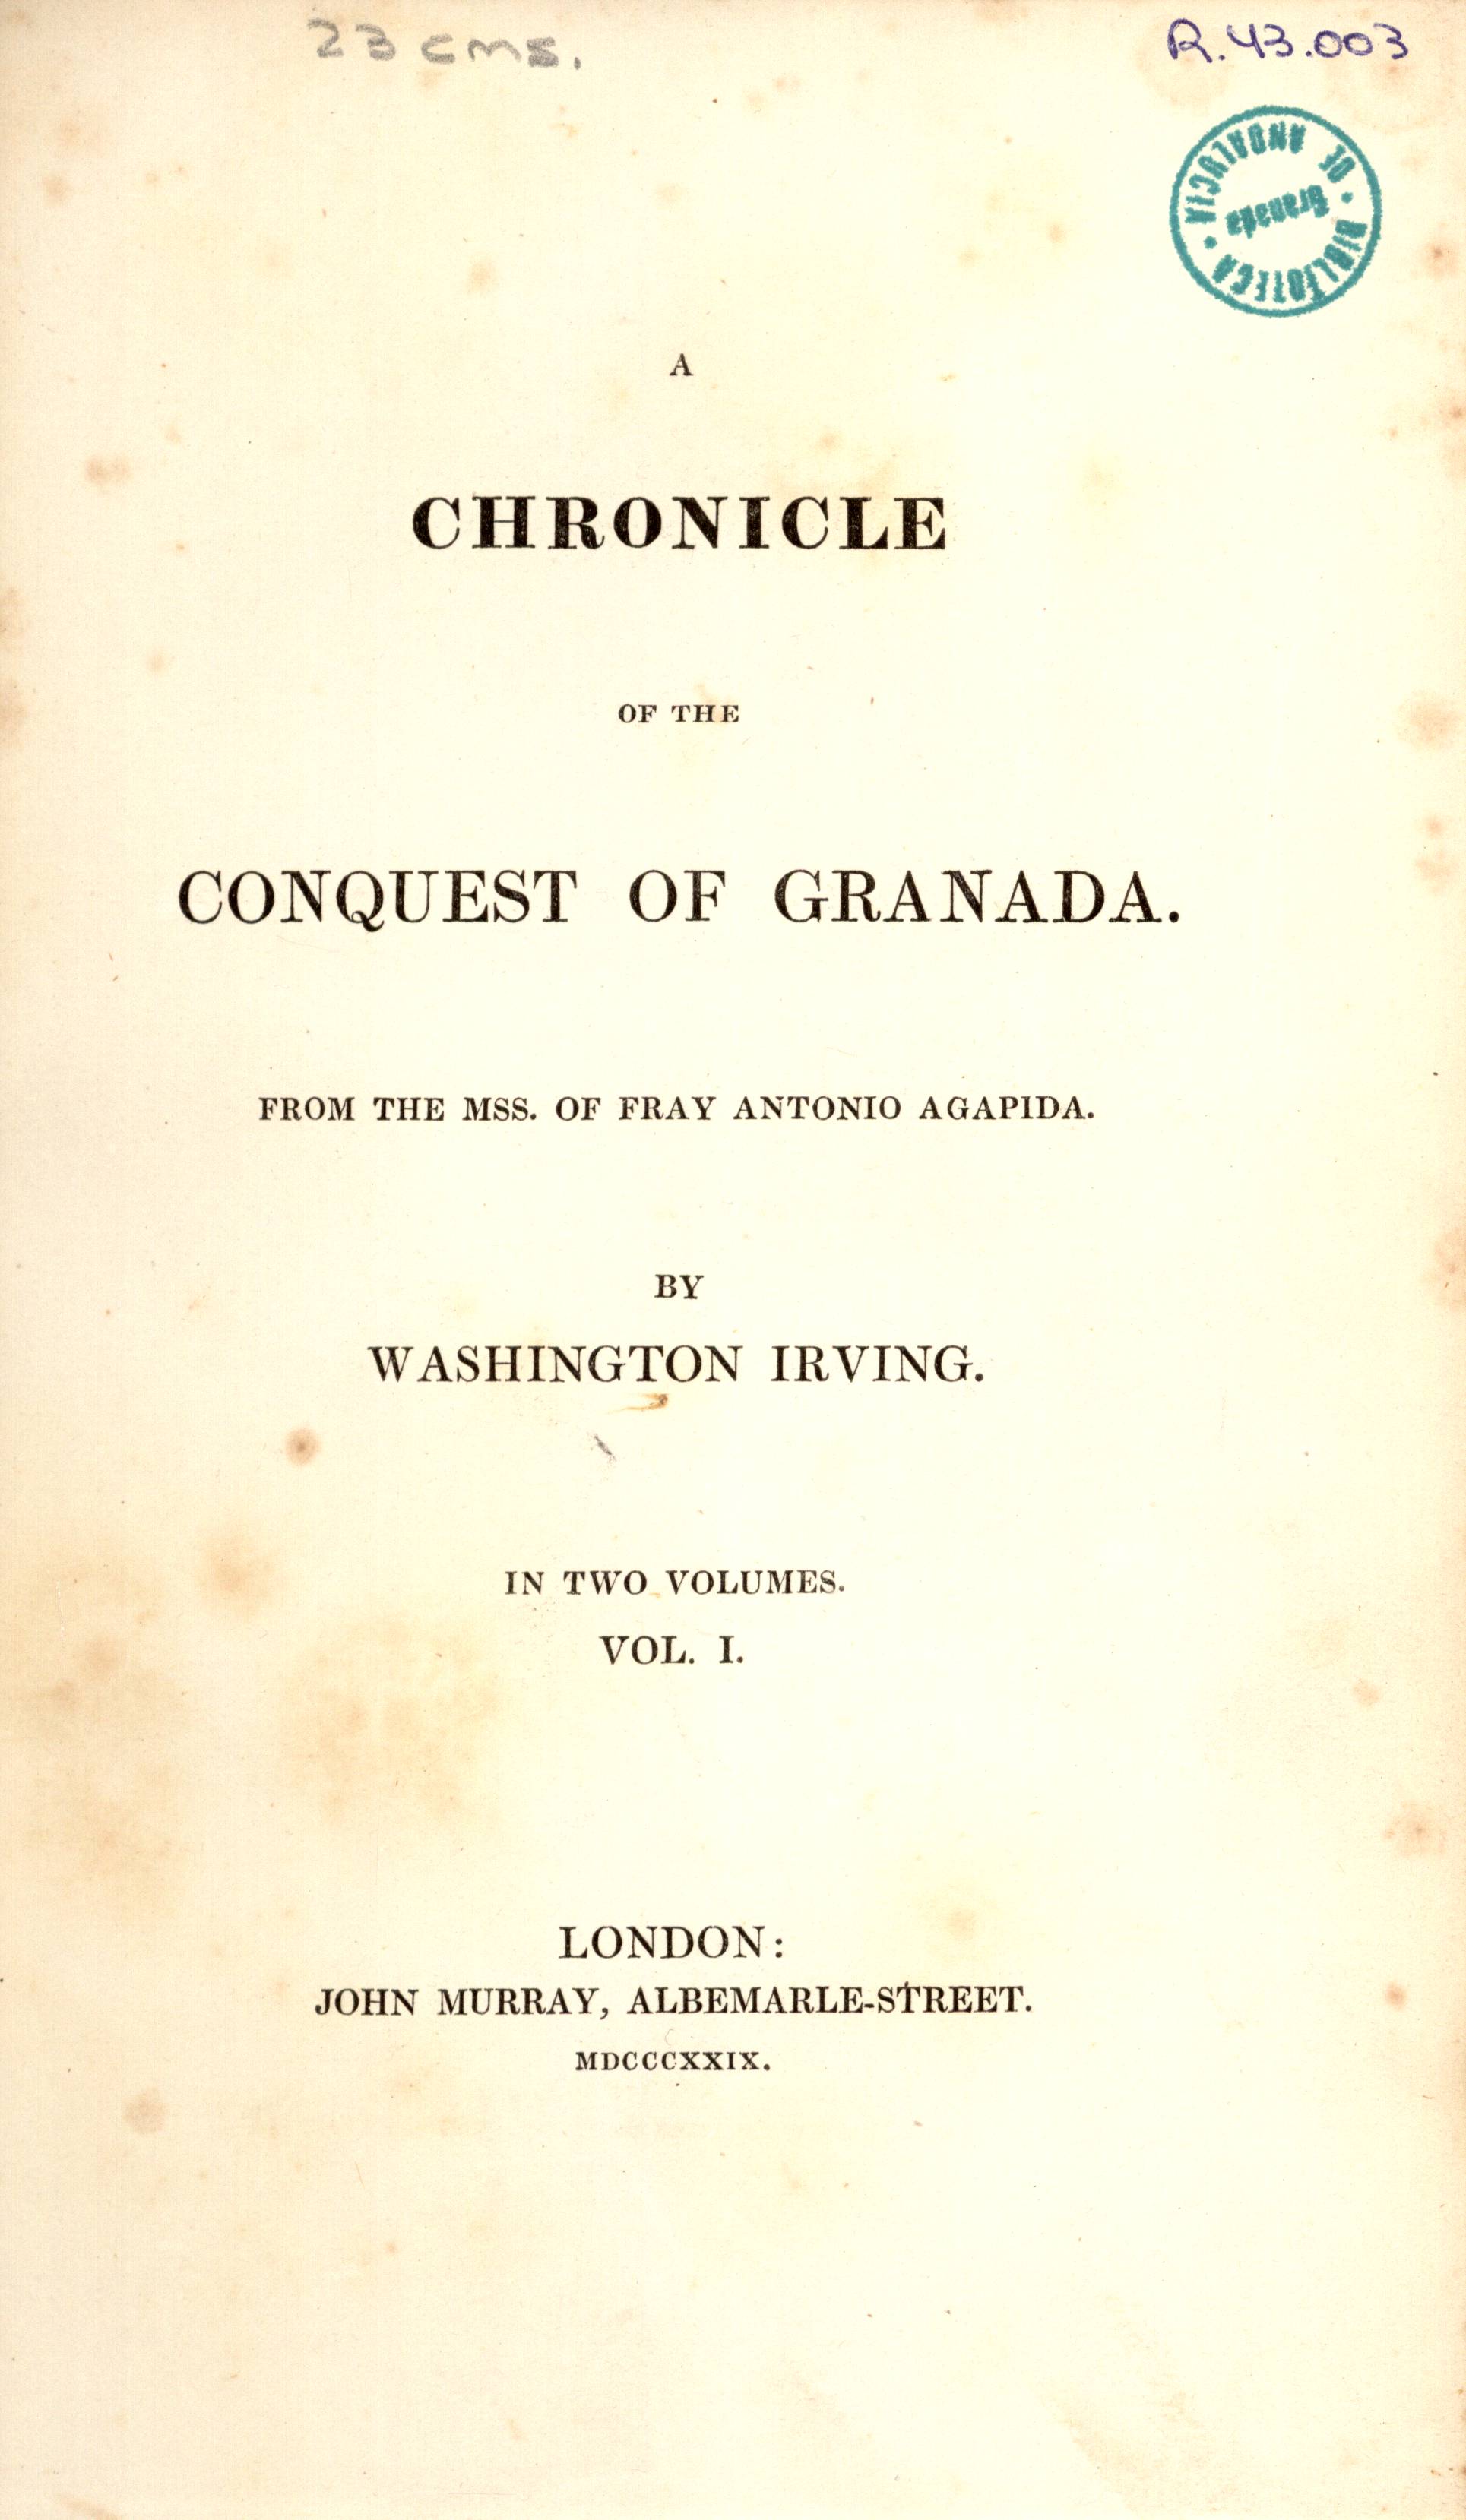 A chronicle of the conquest of Granada ...